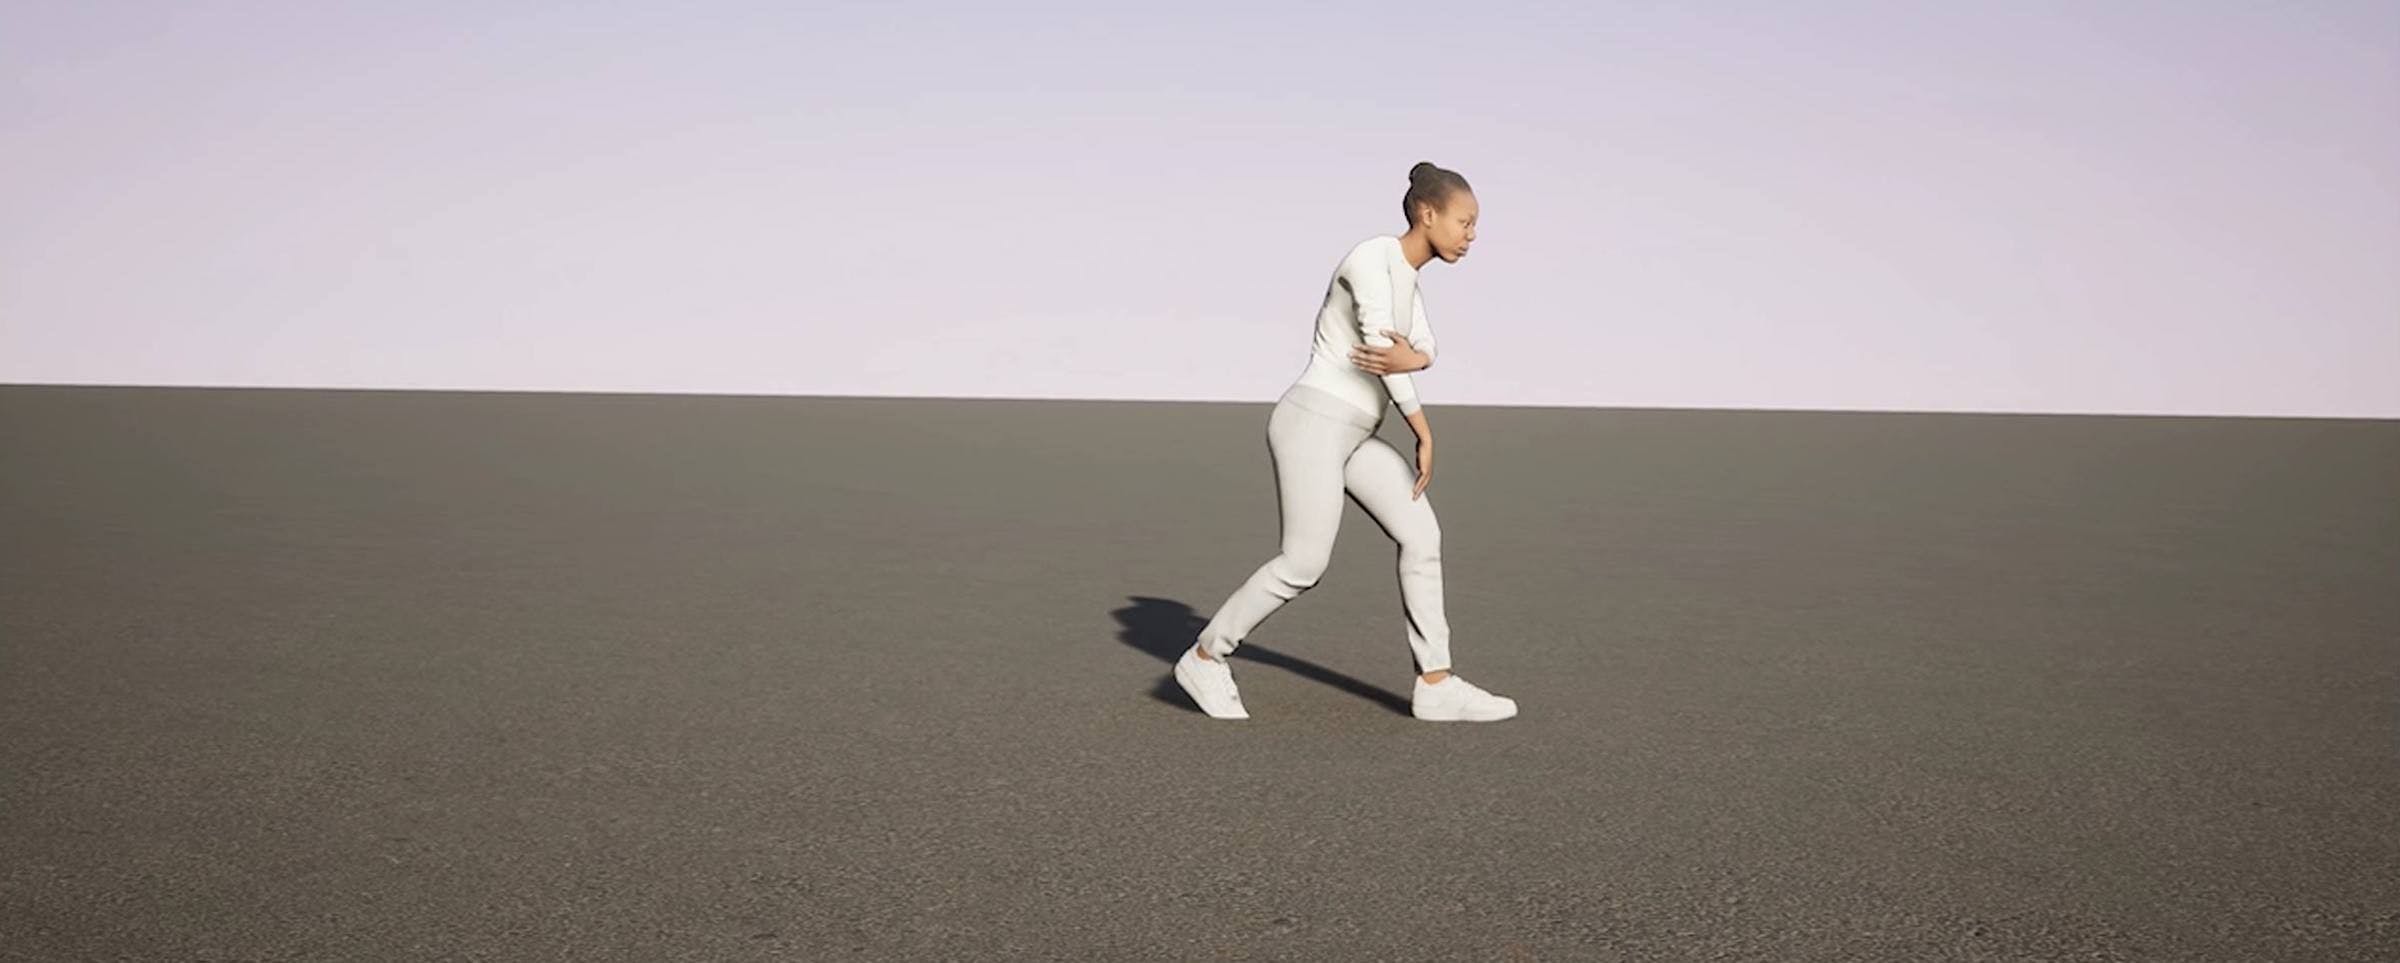 Computer-generated image of a person wearing white and grey clothes. They stand with one knee forward holding their upper arm, stood on tarmac.